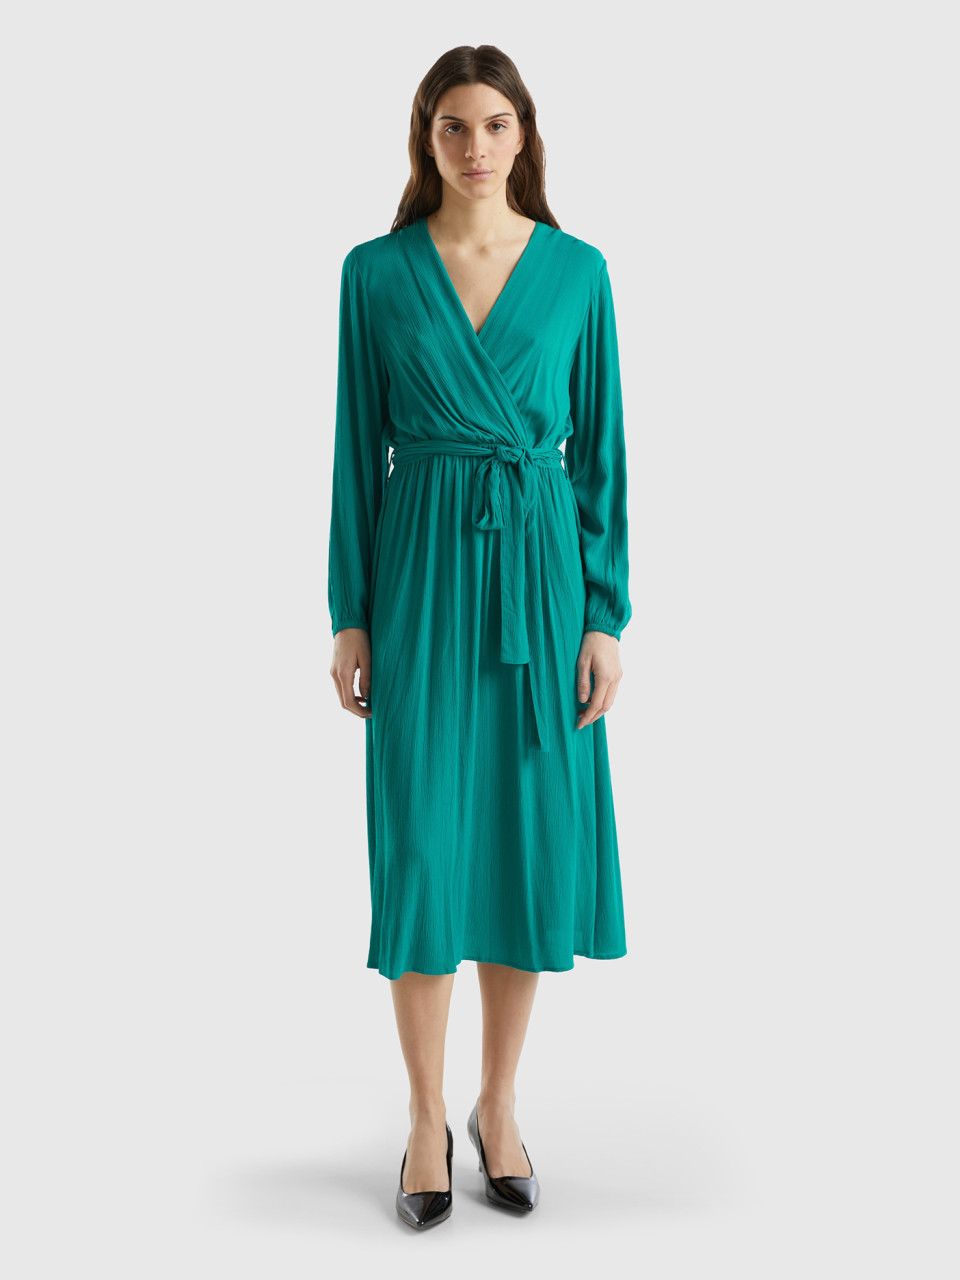 Benetton, Midi Dress With V-neck And Belt, Teal, Women